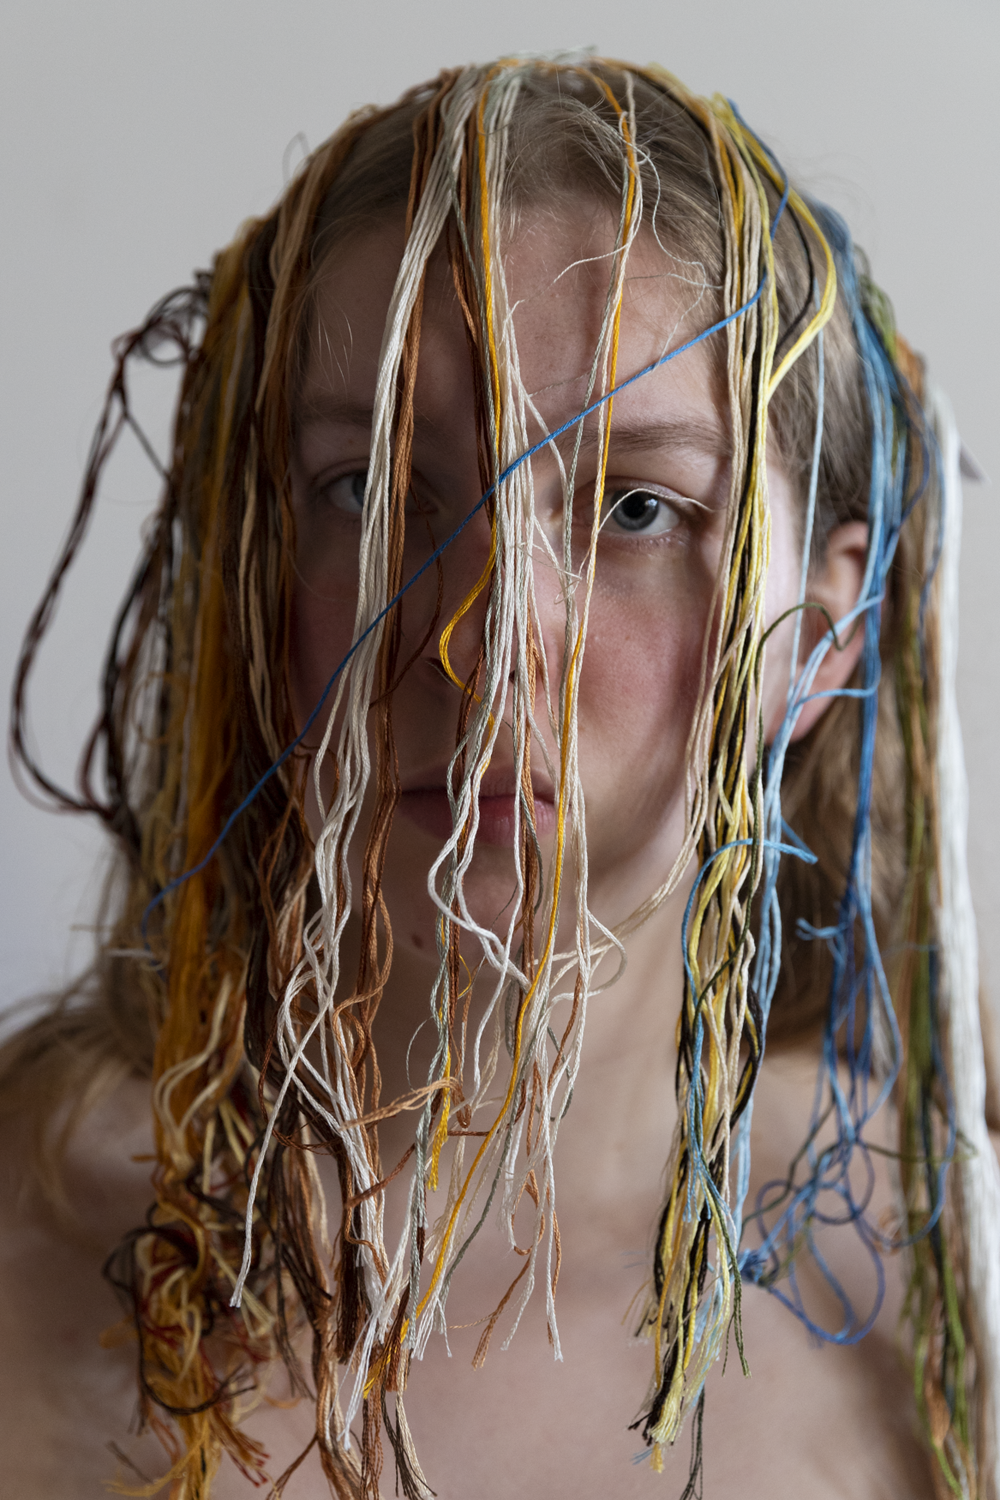 Colour photograph of female face covered with multicoloured strings.